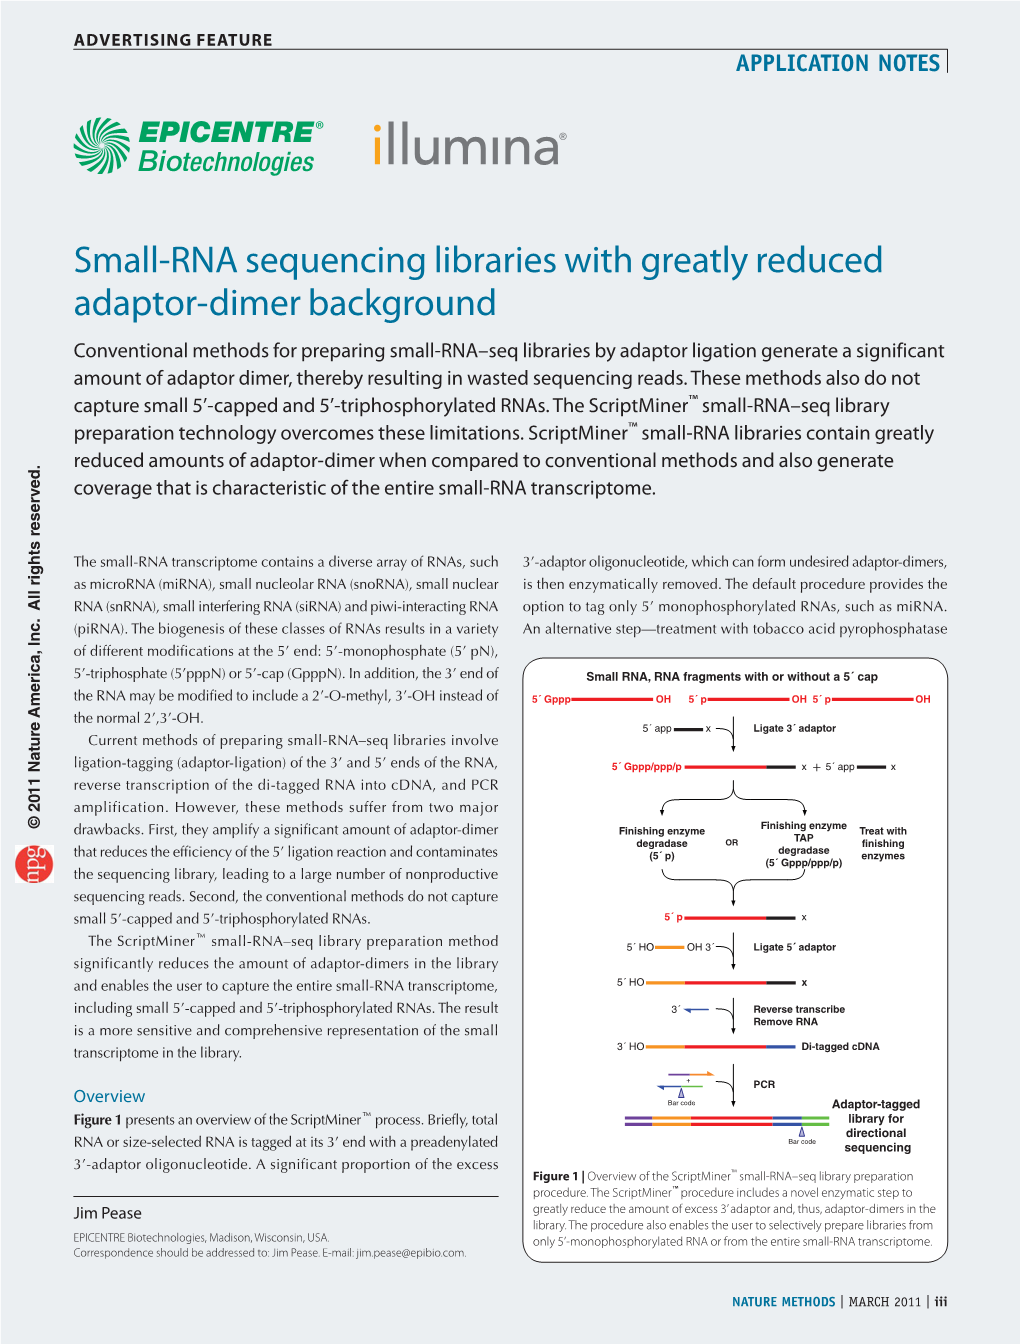 Small-RNA Sequencing Libraries with Greatly Reduced Adaptor-Dimer Background